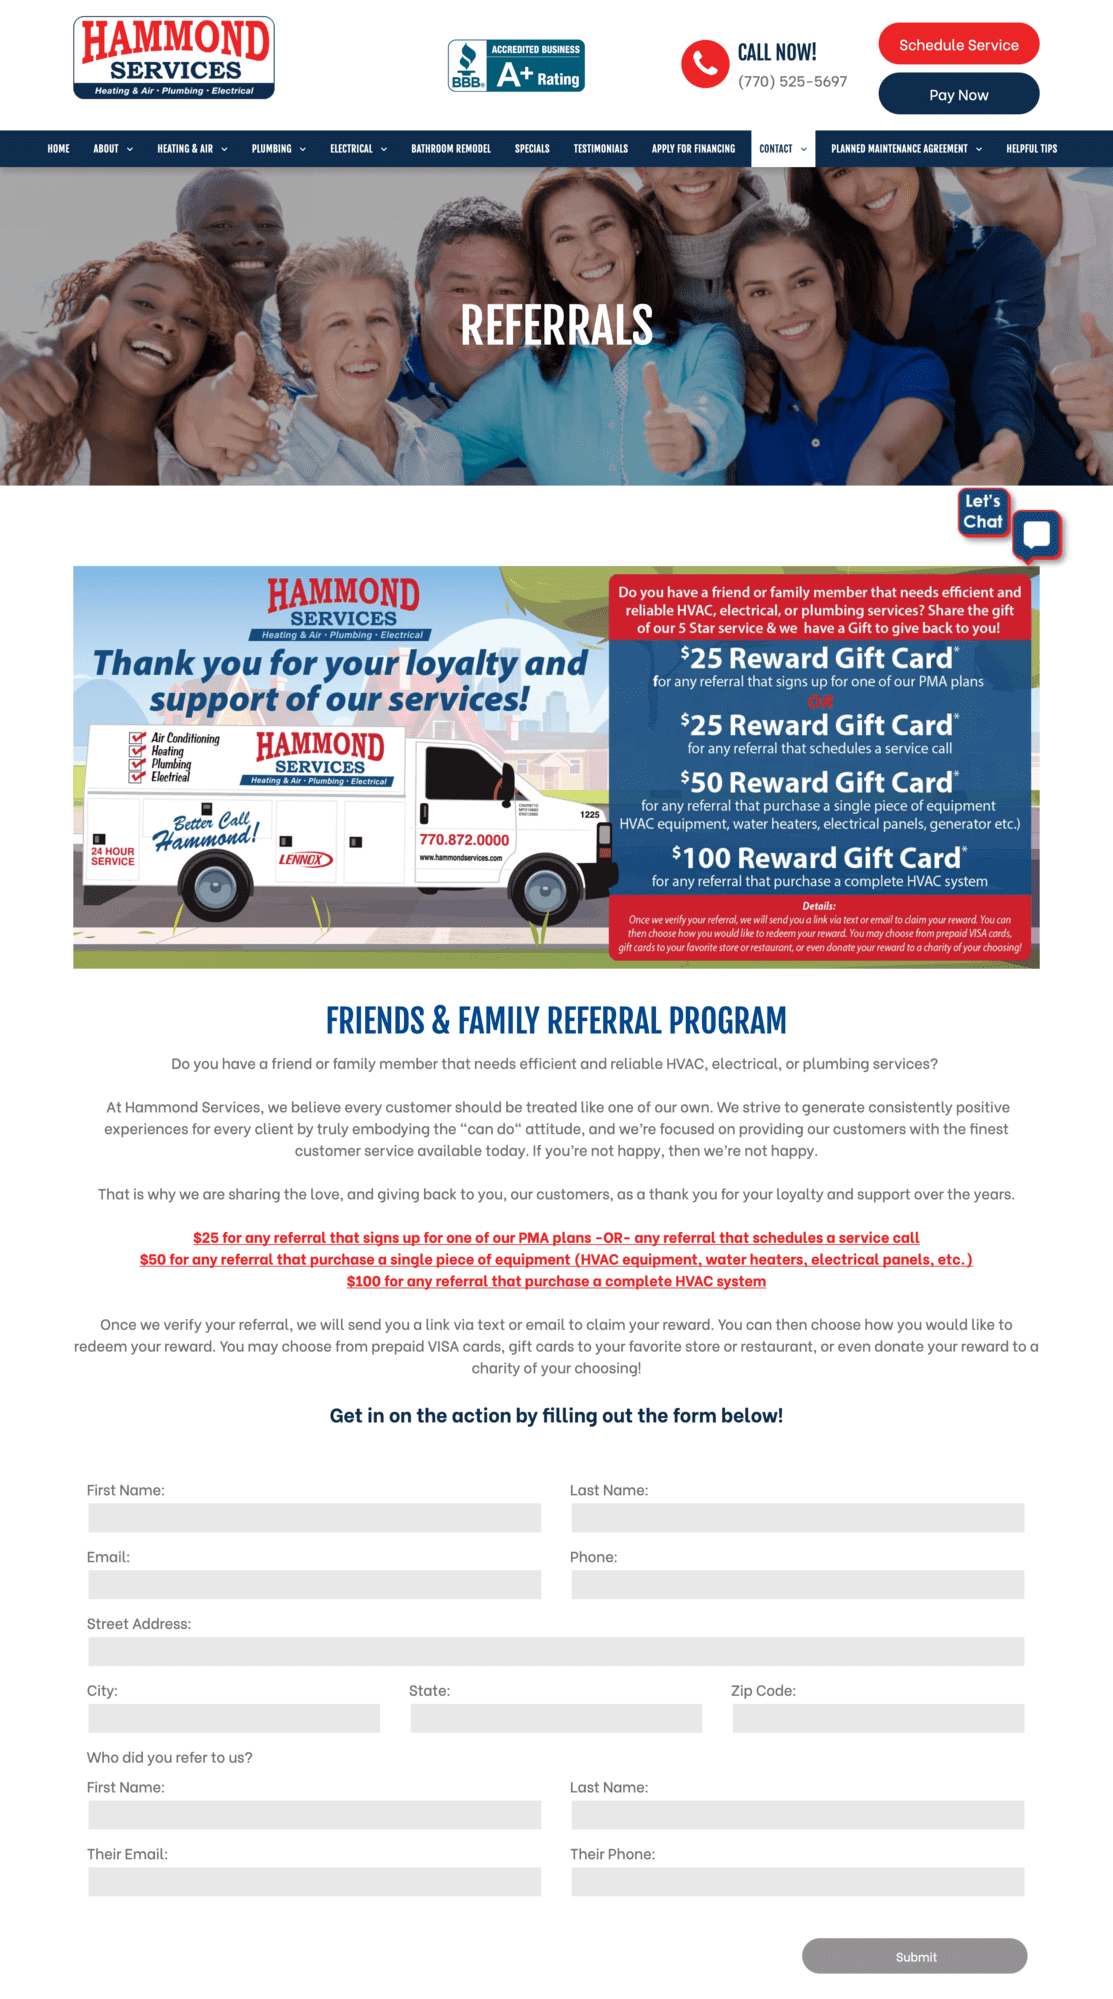 An example of a plumber services online referral program